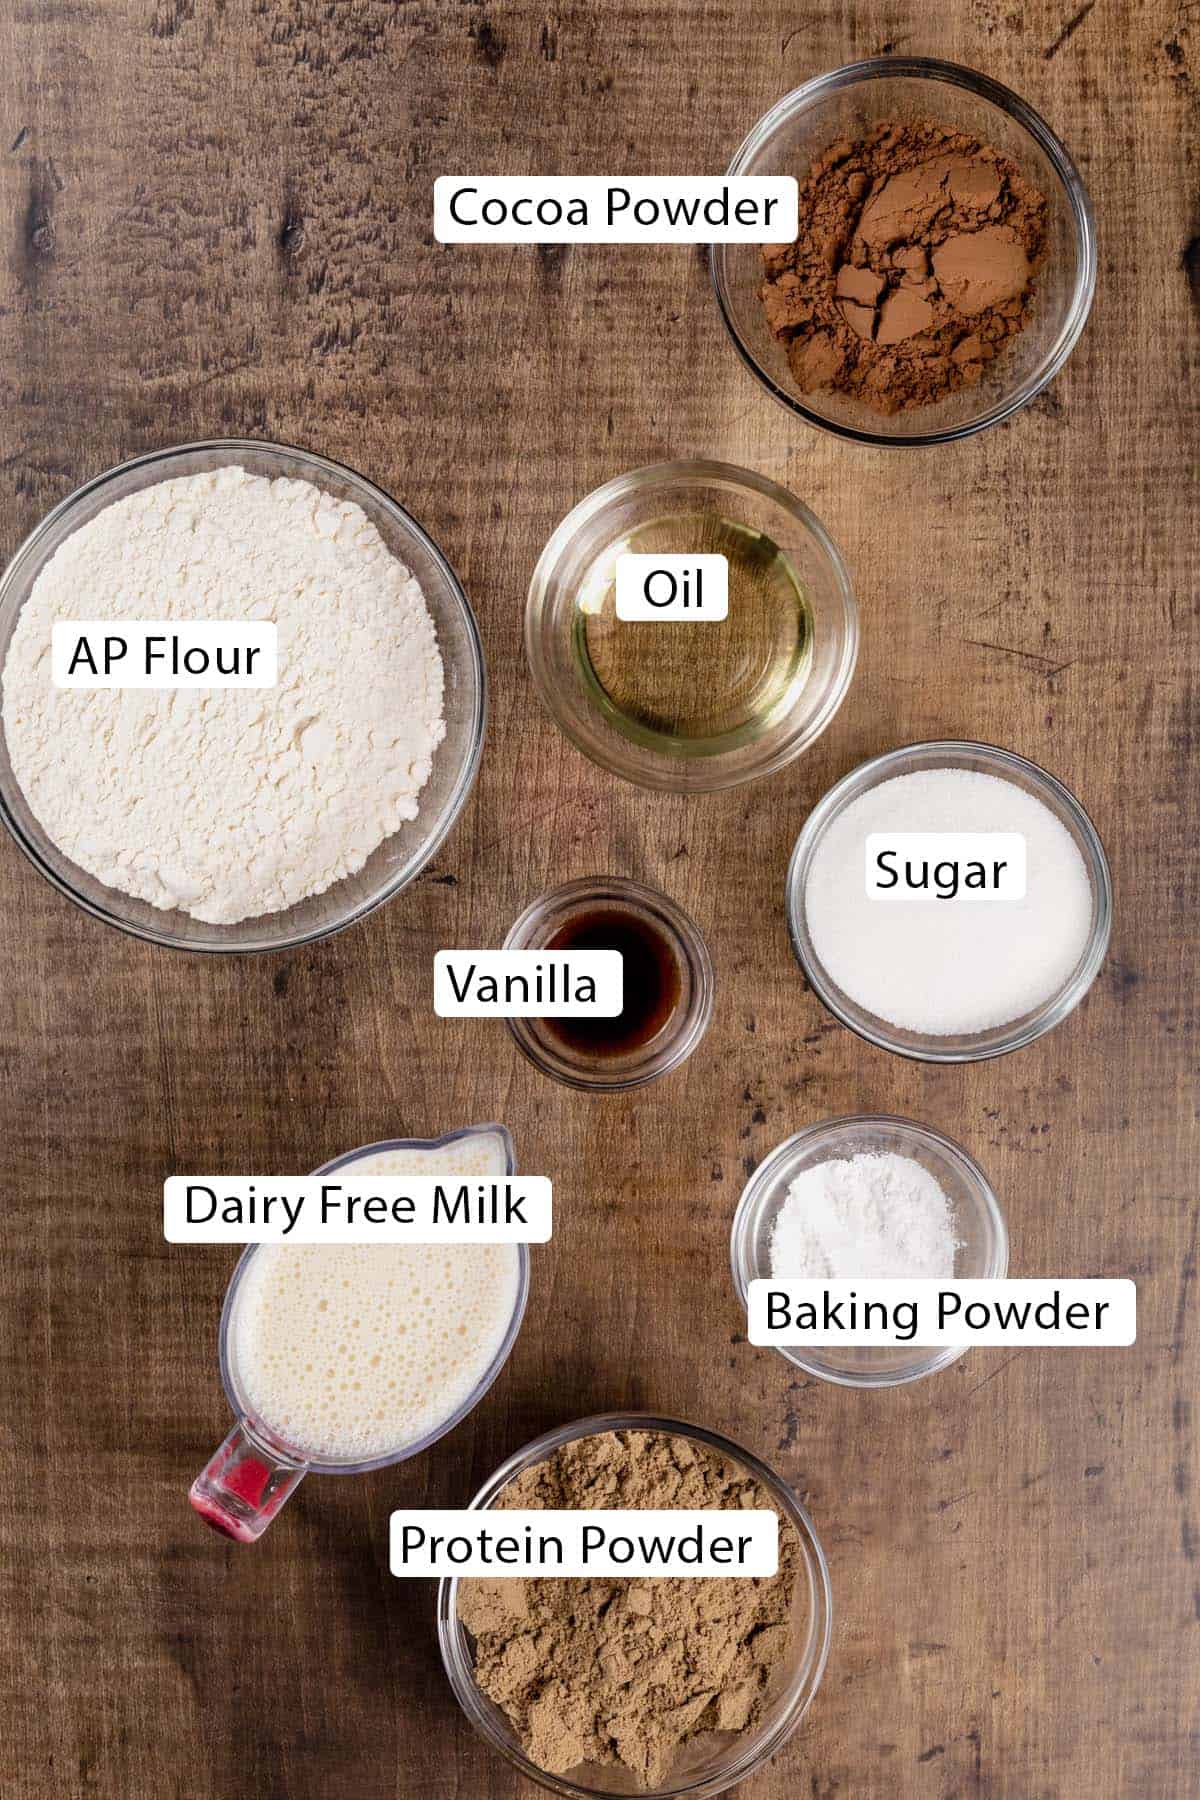 Ingredients for chocolate protein pancakes in several glass bowls on a wood tabletop. Black and white labels have been added to name each ingredient.